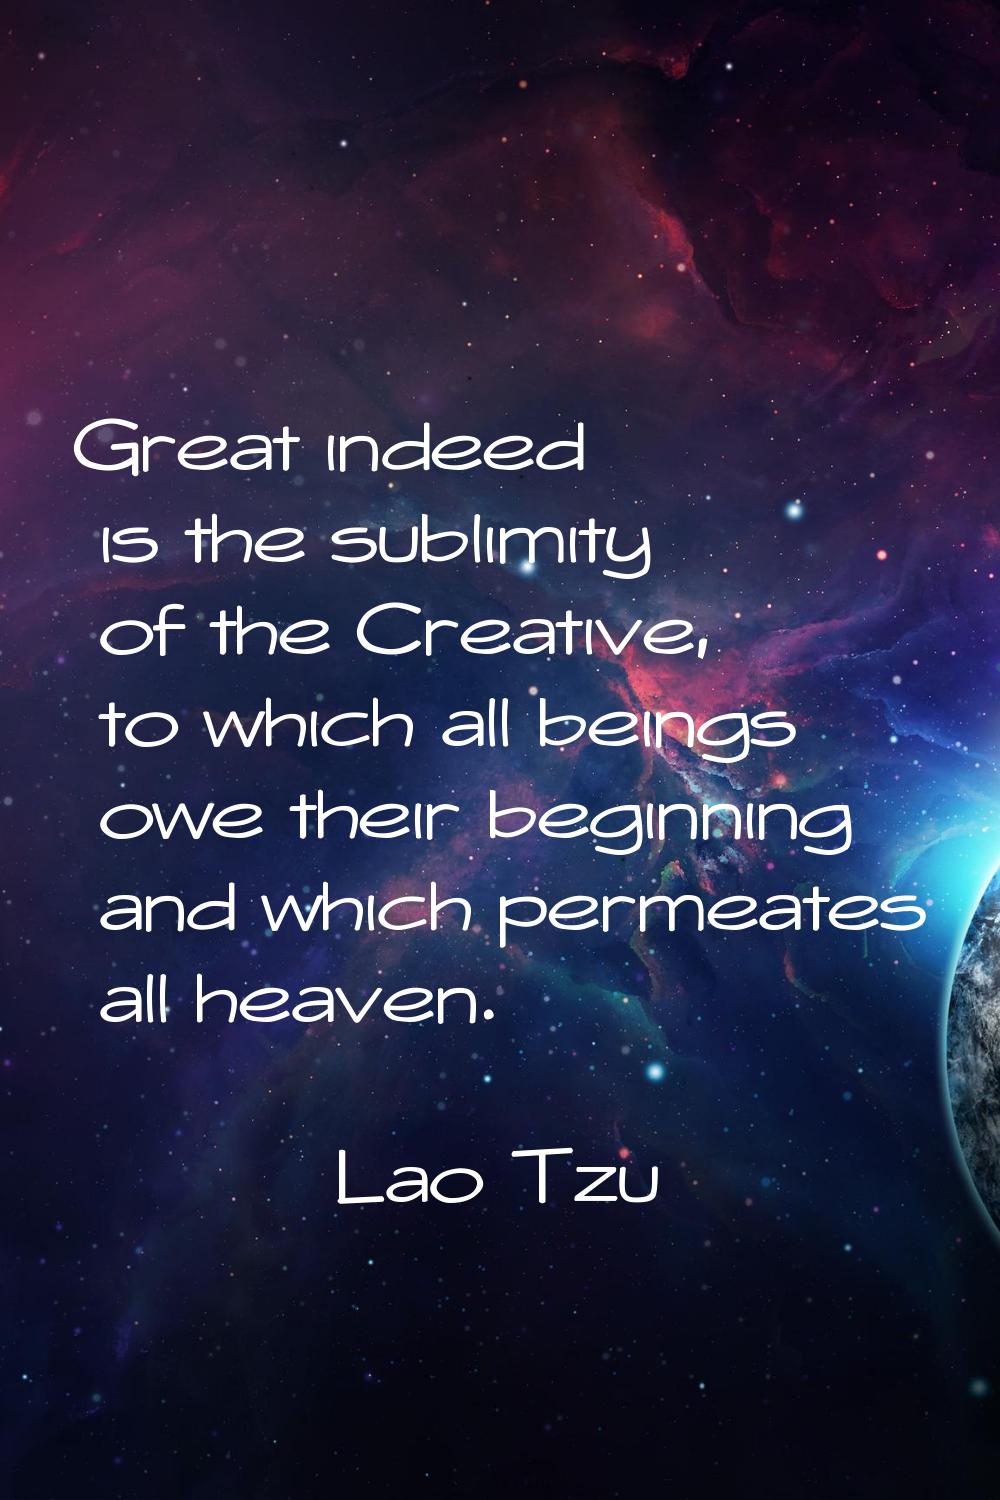 Great indeed is the sublimity of the Creative, to which all beings owe their beginning and which pe